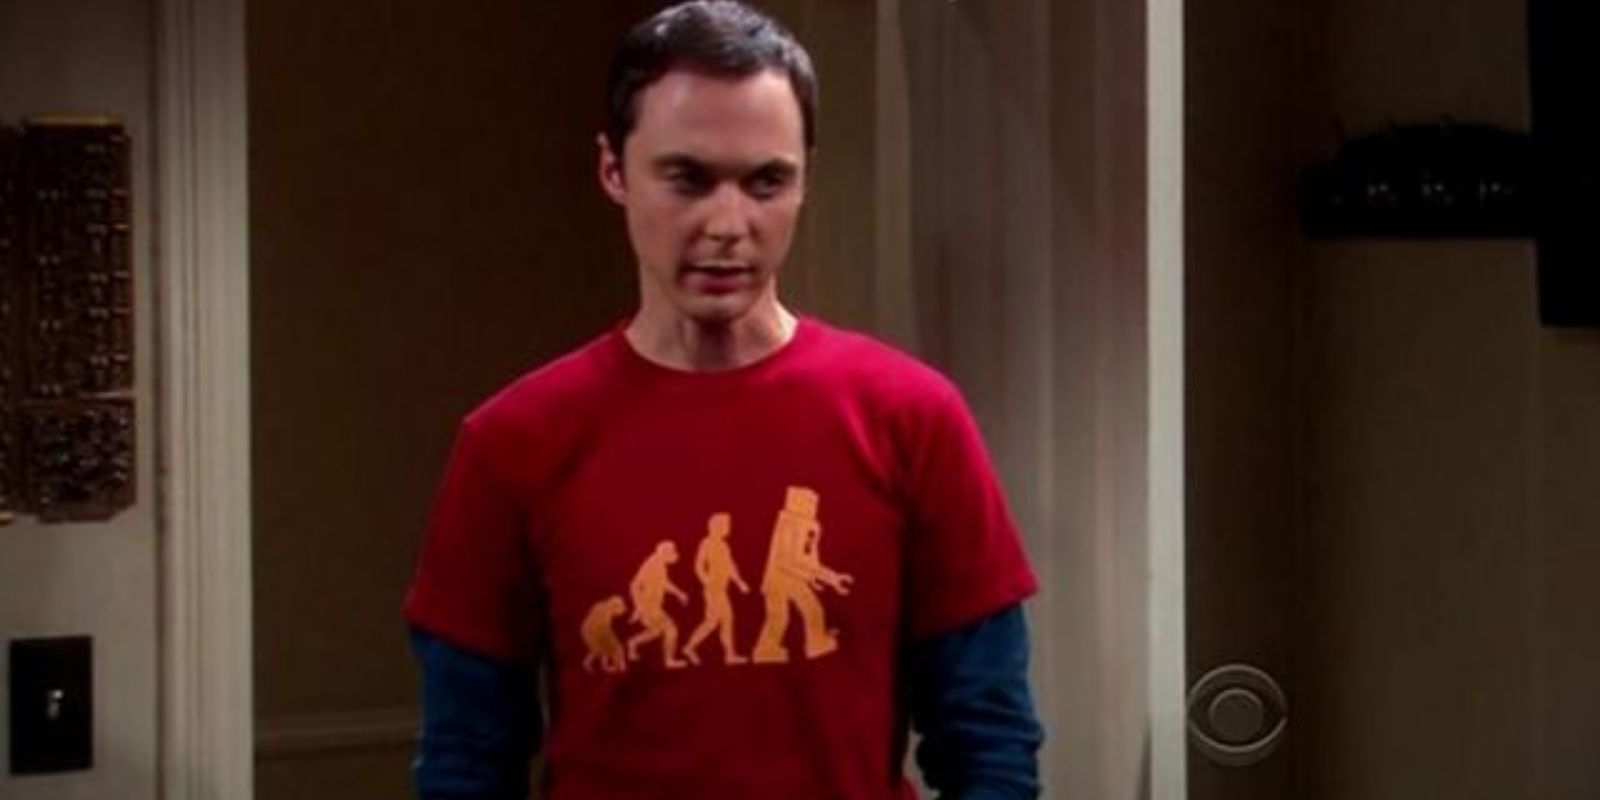 Sheldon Cooper wearin a dark red shirt with the evolution of man from ape to robot in The Big Bang Theory